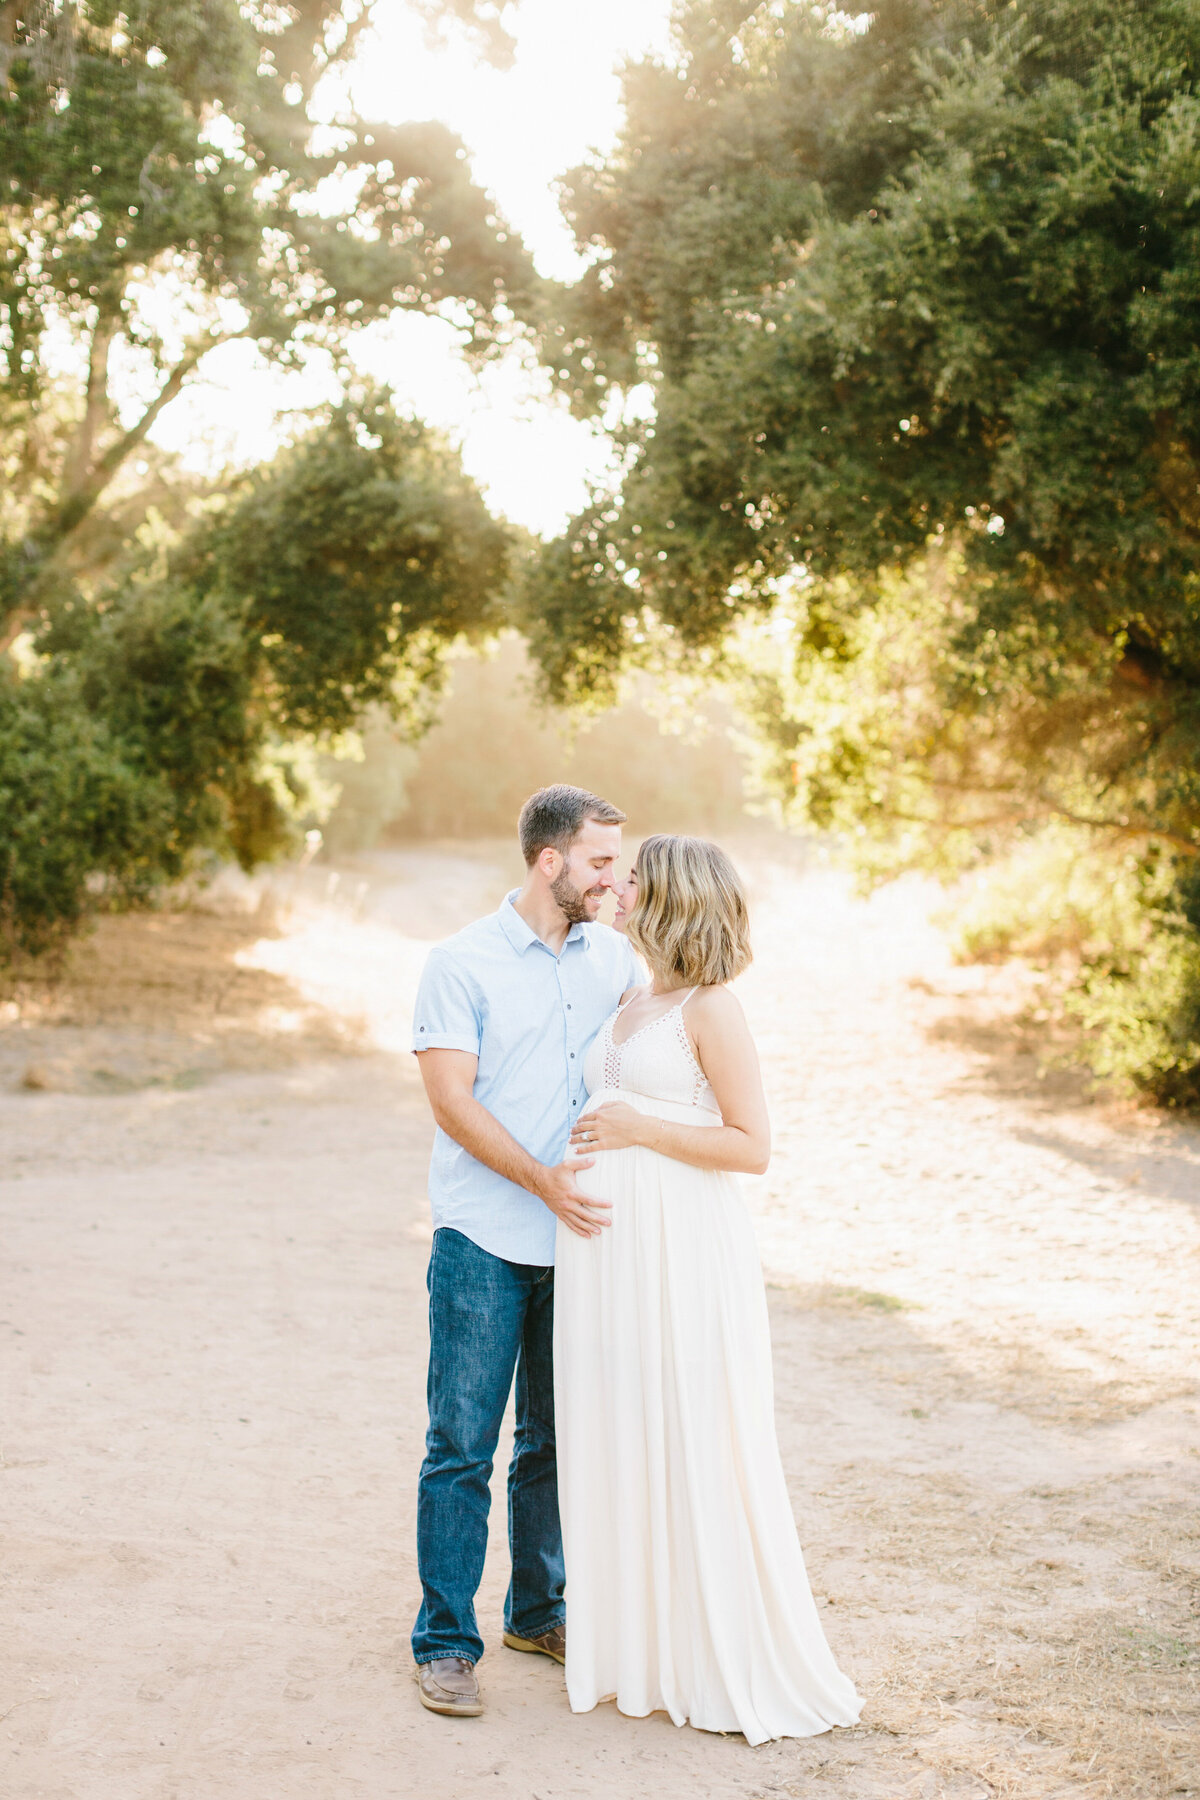 Best California and Texas Family Photographer-Jodee Debes Photography-45